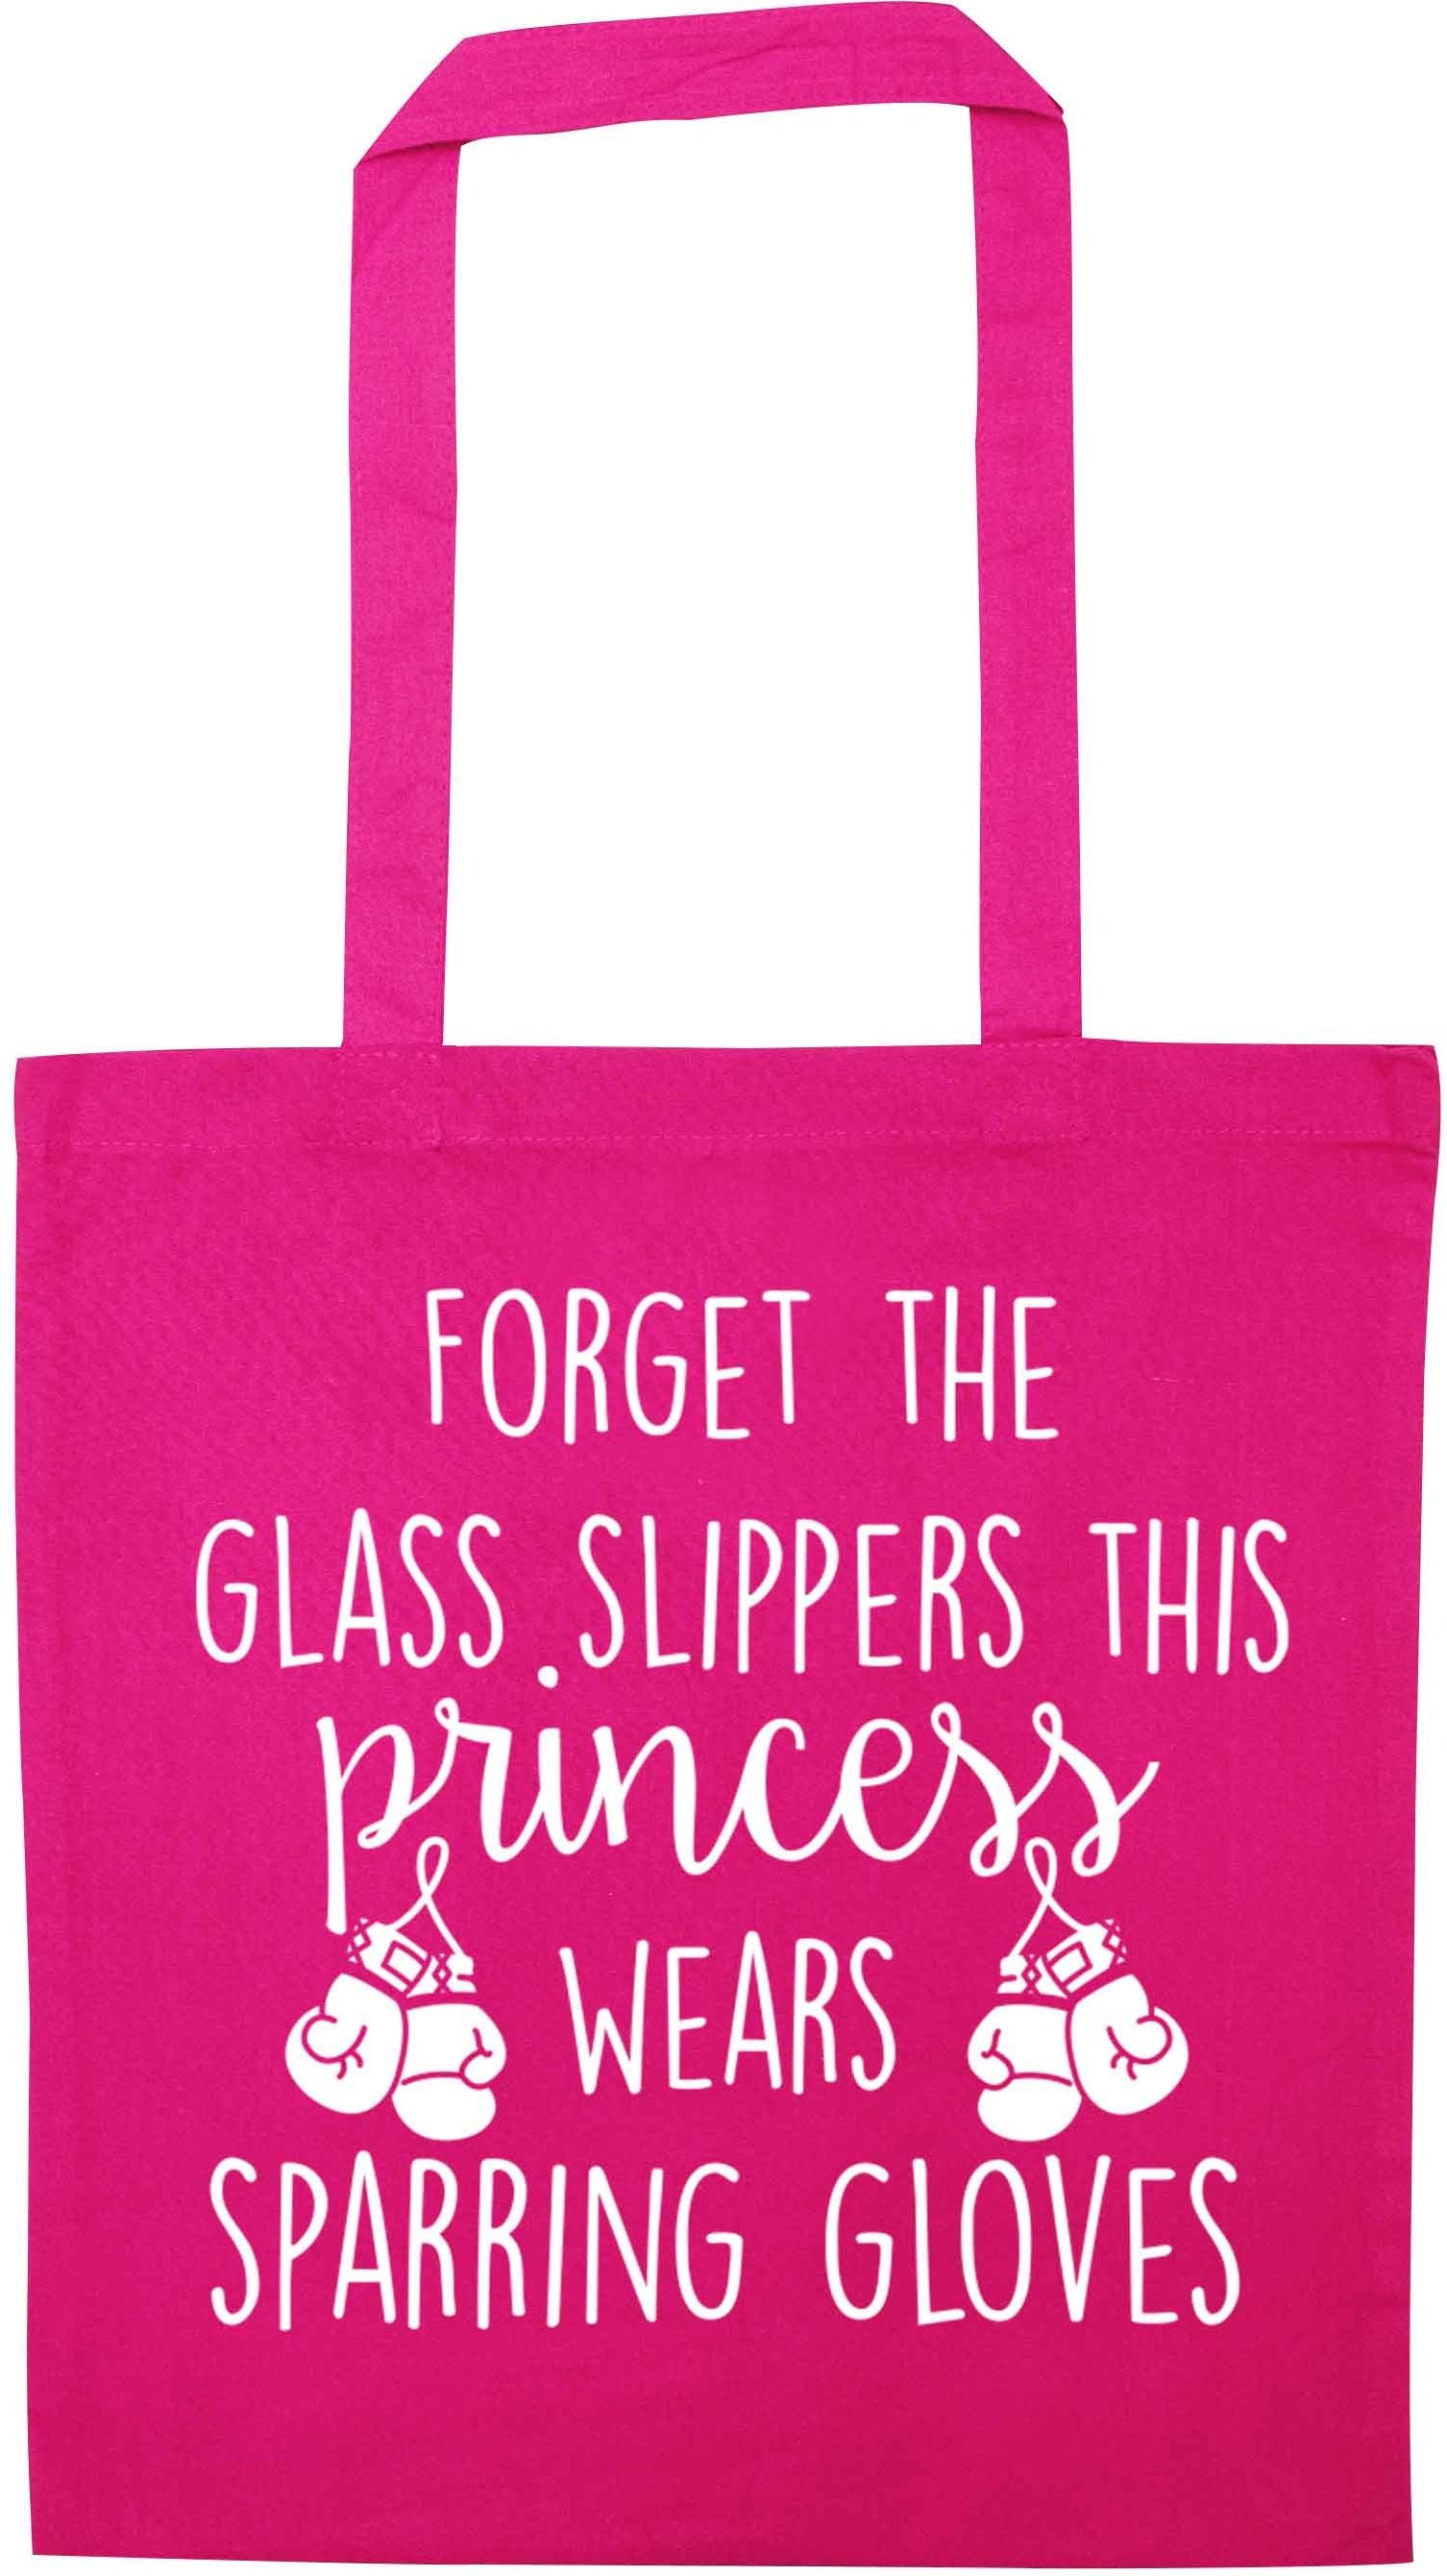 Forget the glass slippers this princess wears sparring gloves pink tote bag